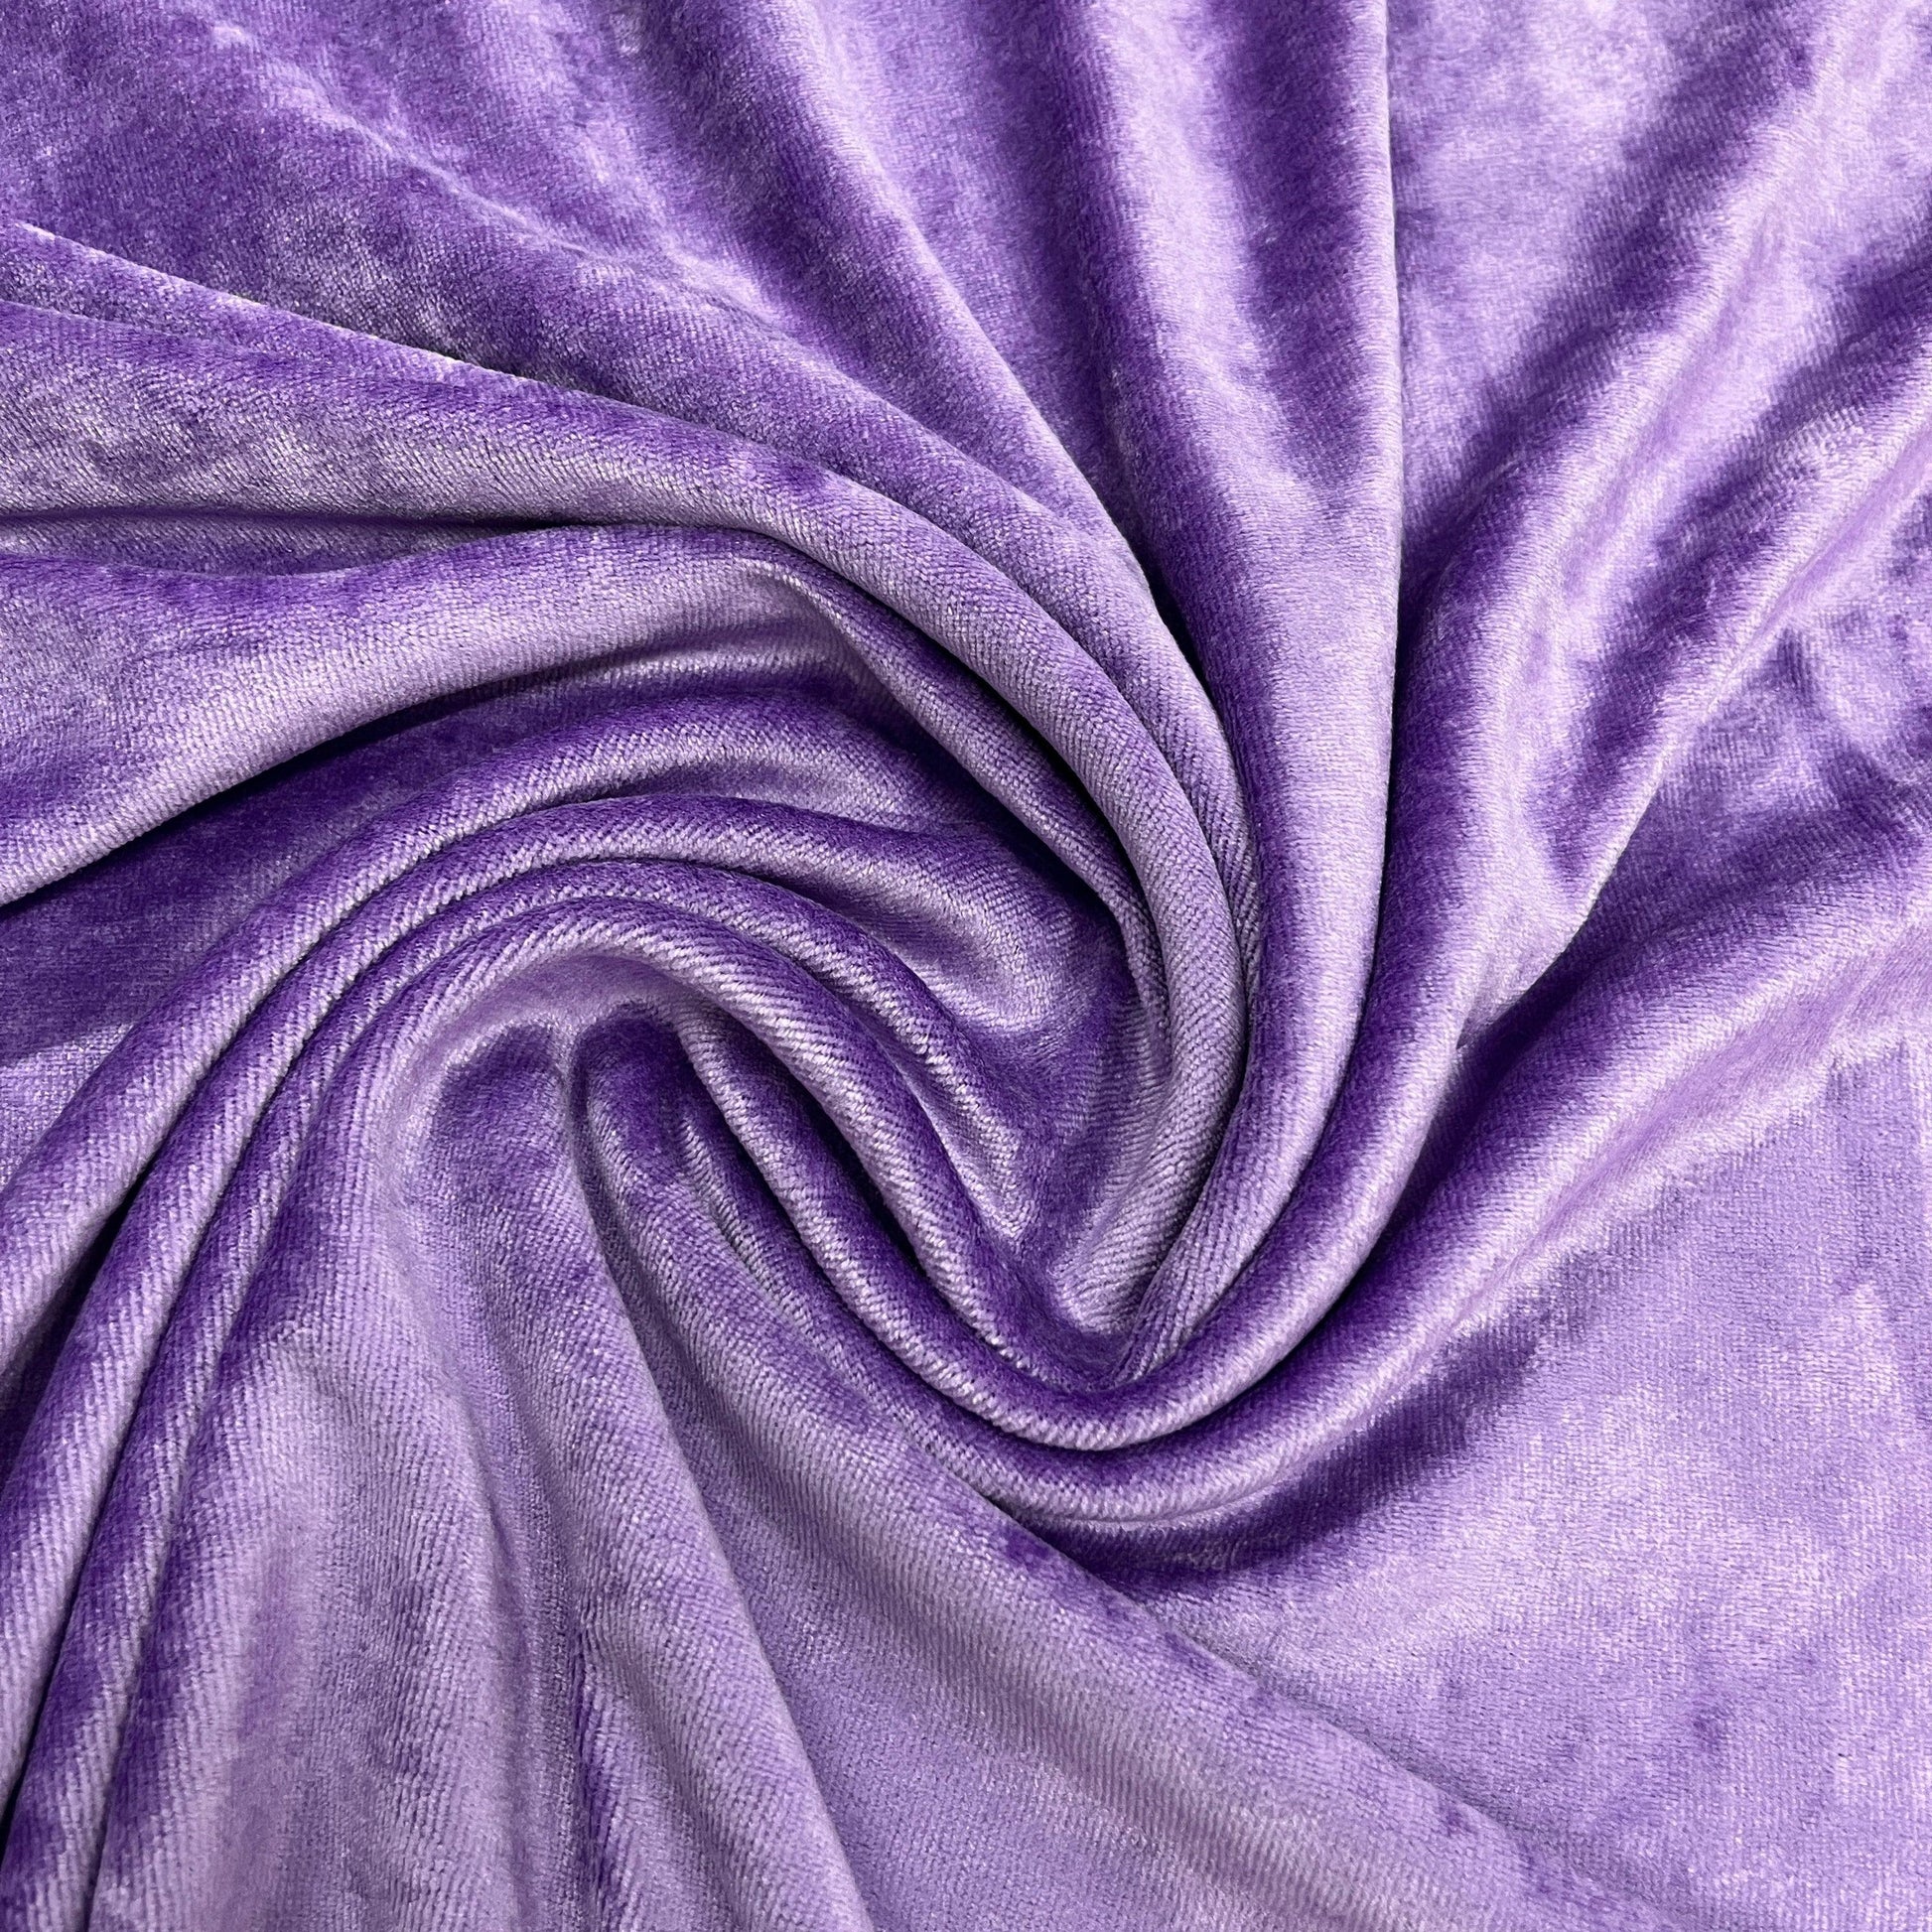 Free SHIIPPING!!! Medium Weight Rayon Stretch Spandex Jersey Knit Fabric  (5Yards, Lt. Lavender)